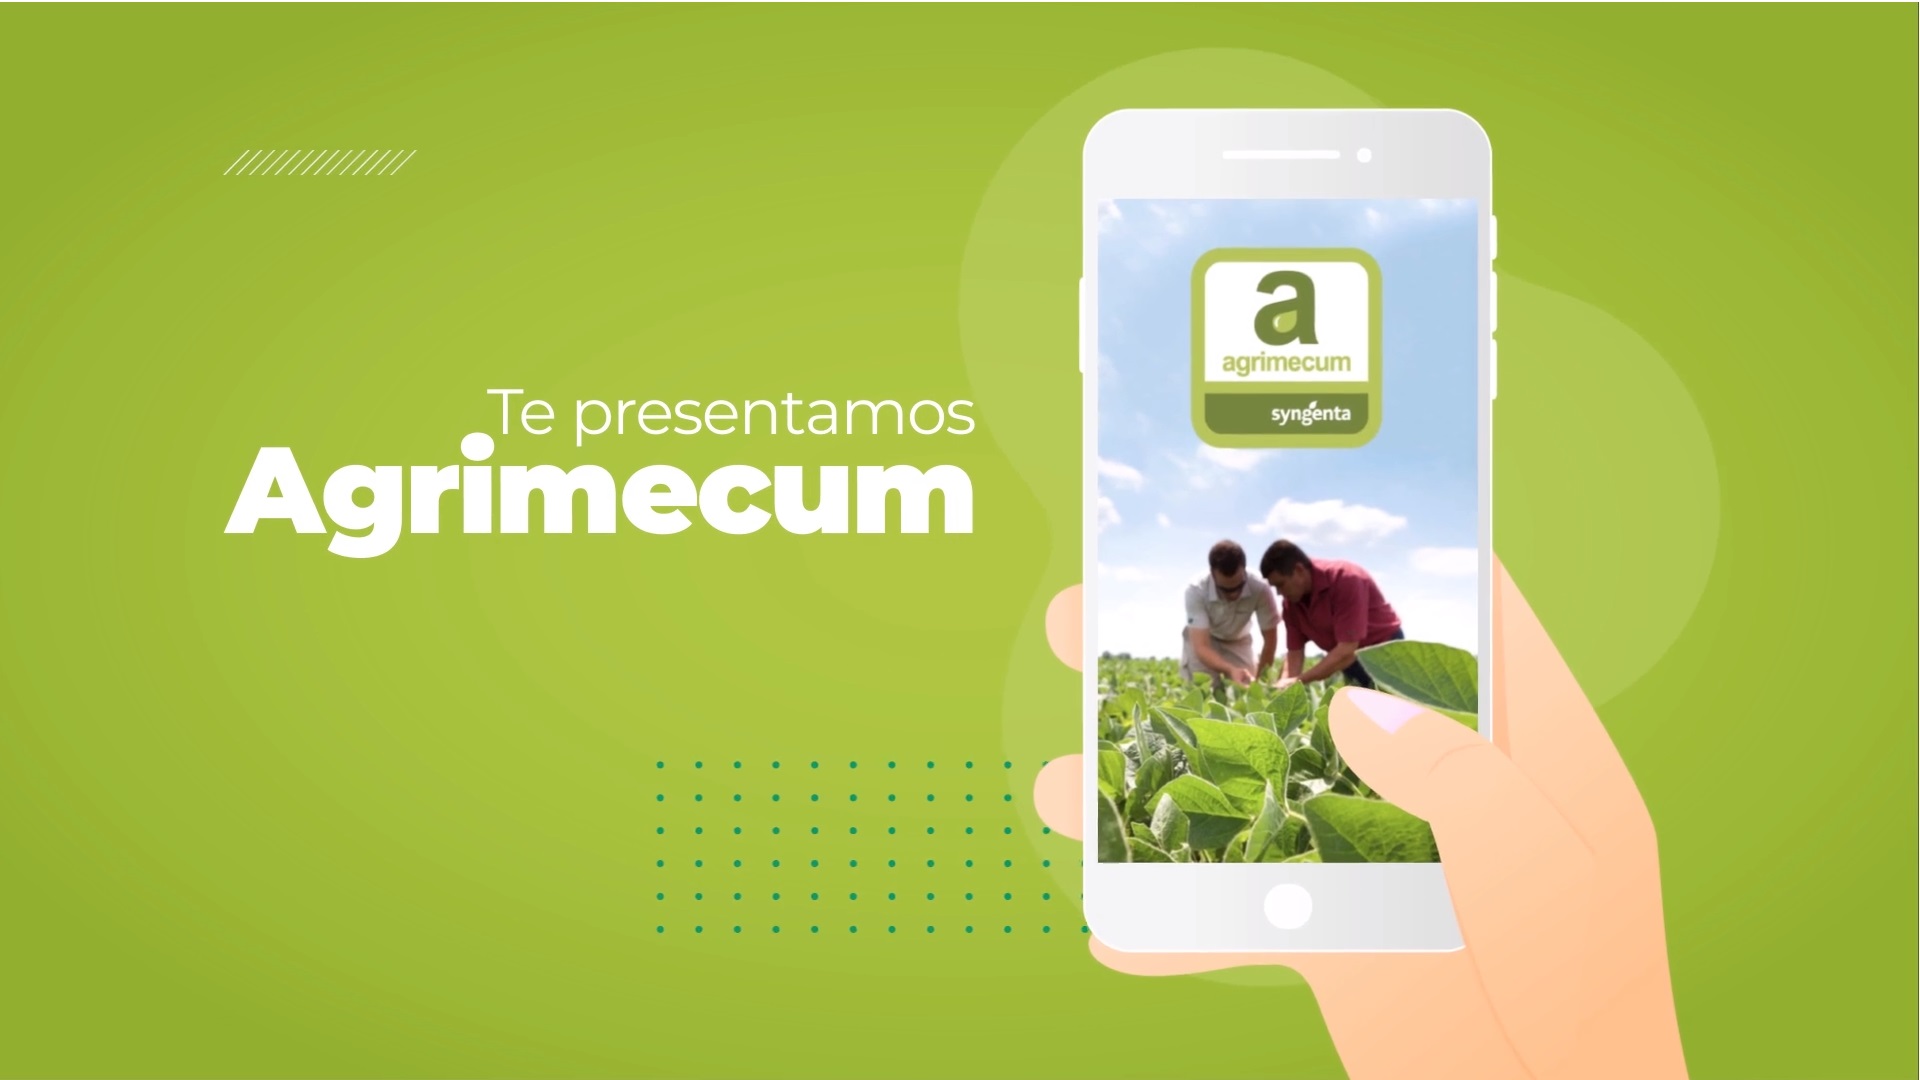 Agrimecum solution by Syngenta a leading science-based agtech company